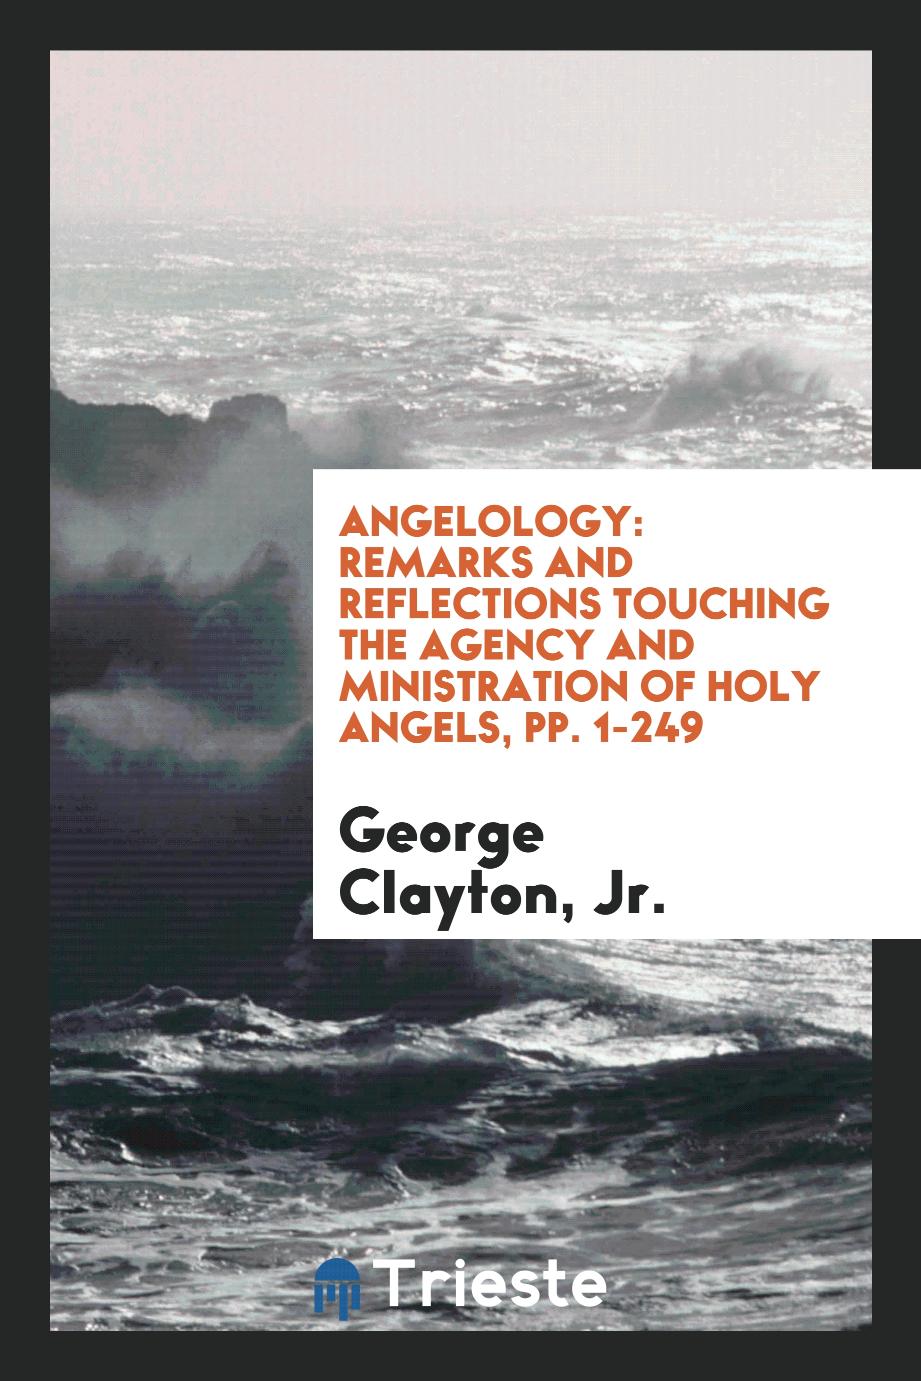 Angelology: Remarks and Reflections Touching the Agency and Ministration of Holy Angels, pp. 1-249